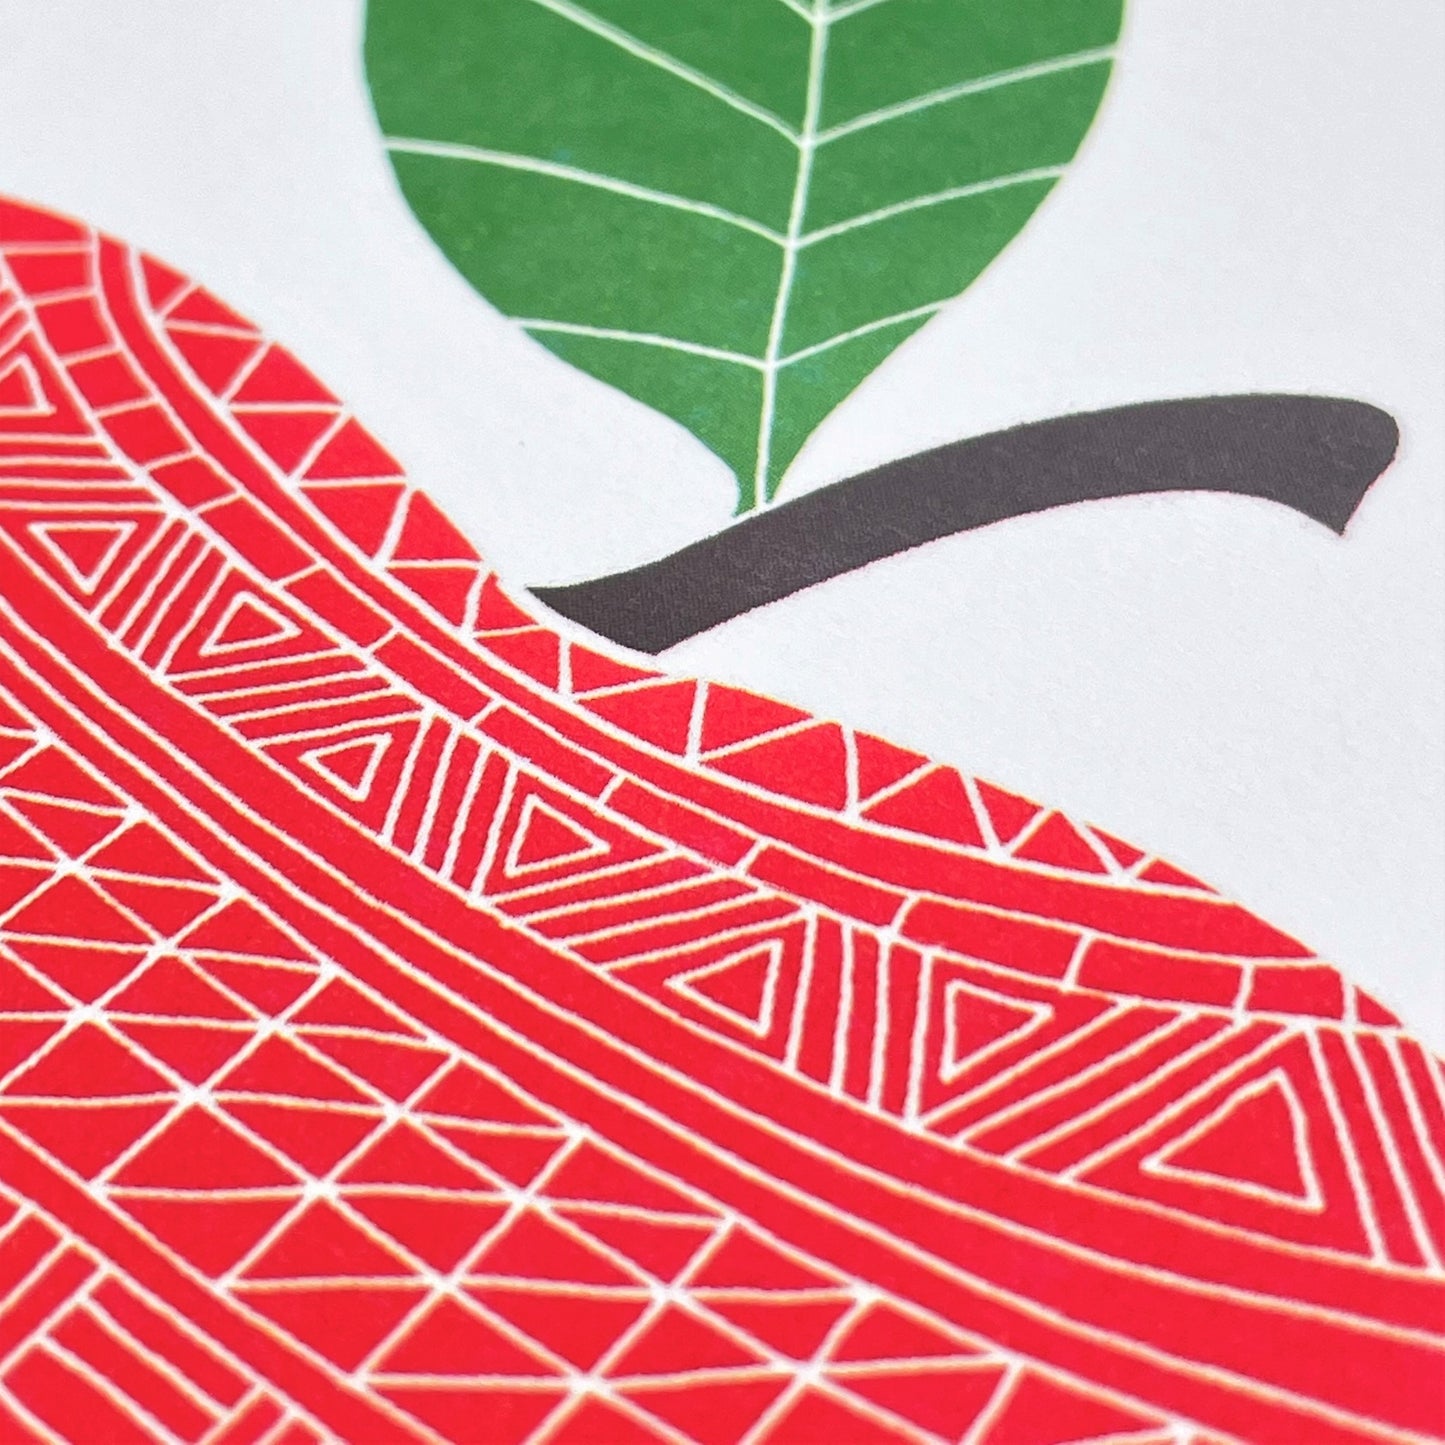 greetings card showing a patterned red apple, close up of the card